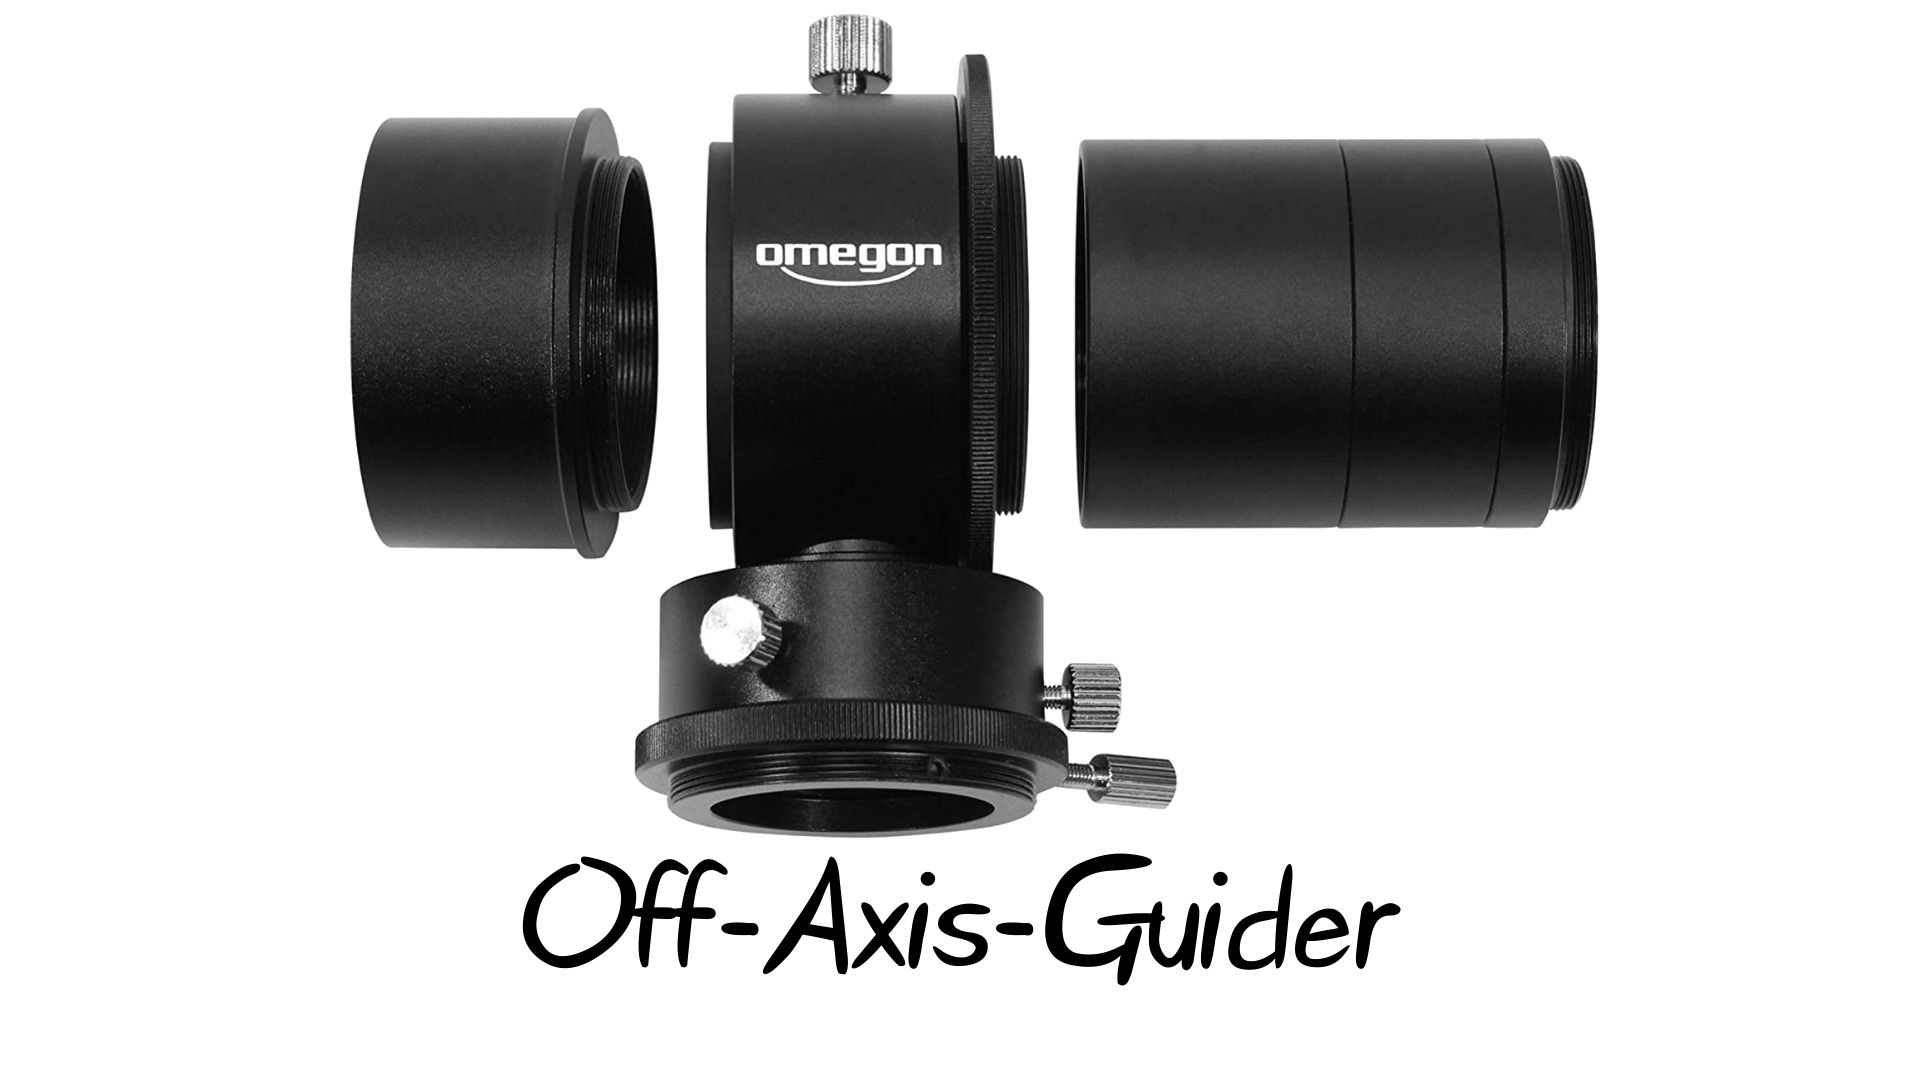 Off-Axis-Guider